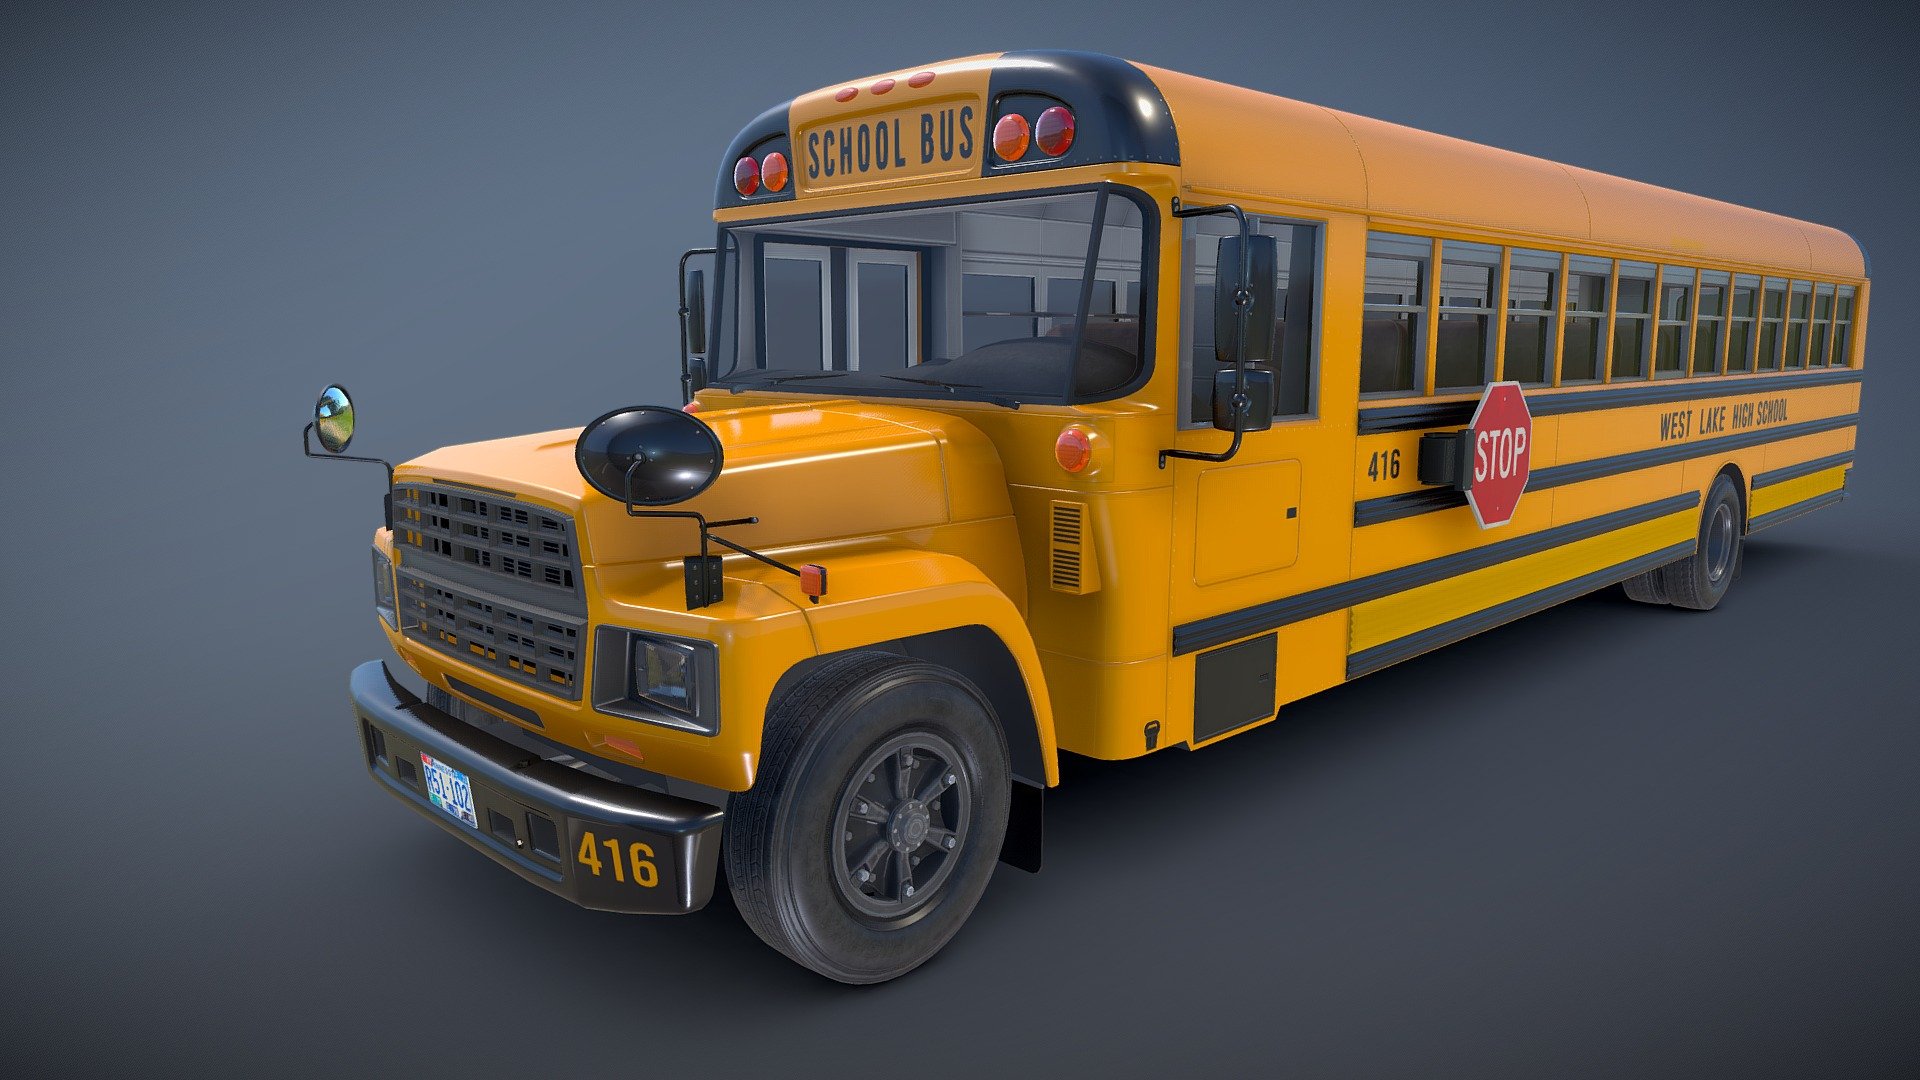 American school bus game ready model.

Full textured model with clean topology.

High accuracy exterior model

Different tires for rear and front wheels.

High detailed body - seams, rivets, chrome parts, wipers and etc.

Side and back doors are openable.

Lowpoly interior - 5876 tris 4123 verts

Wheels - 9280 tris 5462 verts

Full model - 58160 tris 34928 verts

High detailed rims and tires, with PBR maps(Base_Color/Metallic/Normal/Roughness.png2048x2048 )

Original scale. Lenght 11.6m , width 2.35m , height 2.8m.

Model ready for real-time apps, games, virtual reality and augmented reality 3d model